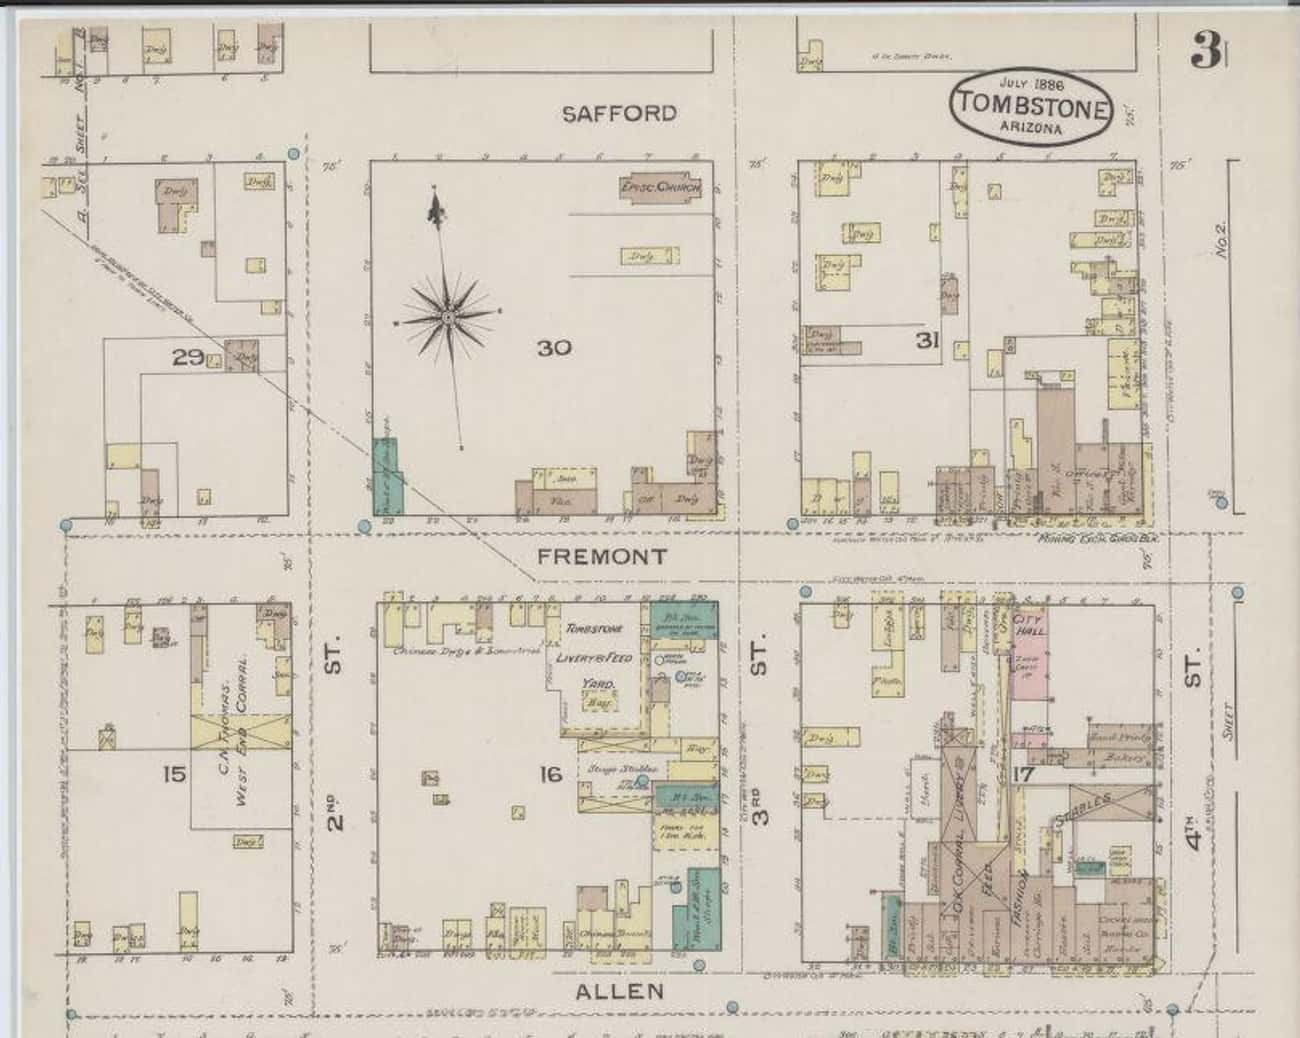 A Fire Insurance Map That Shows The O.K. Corral